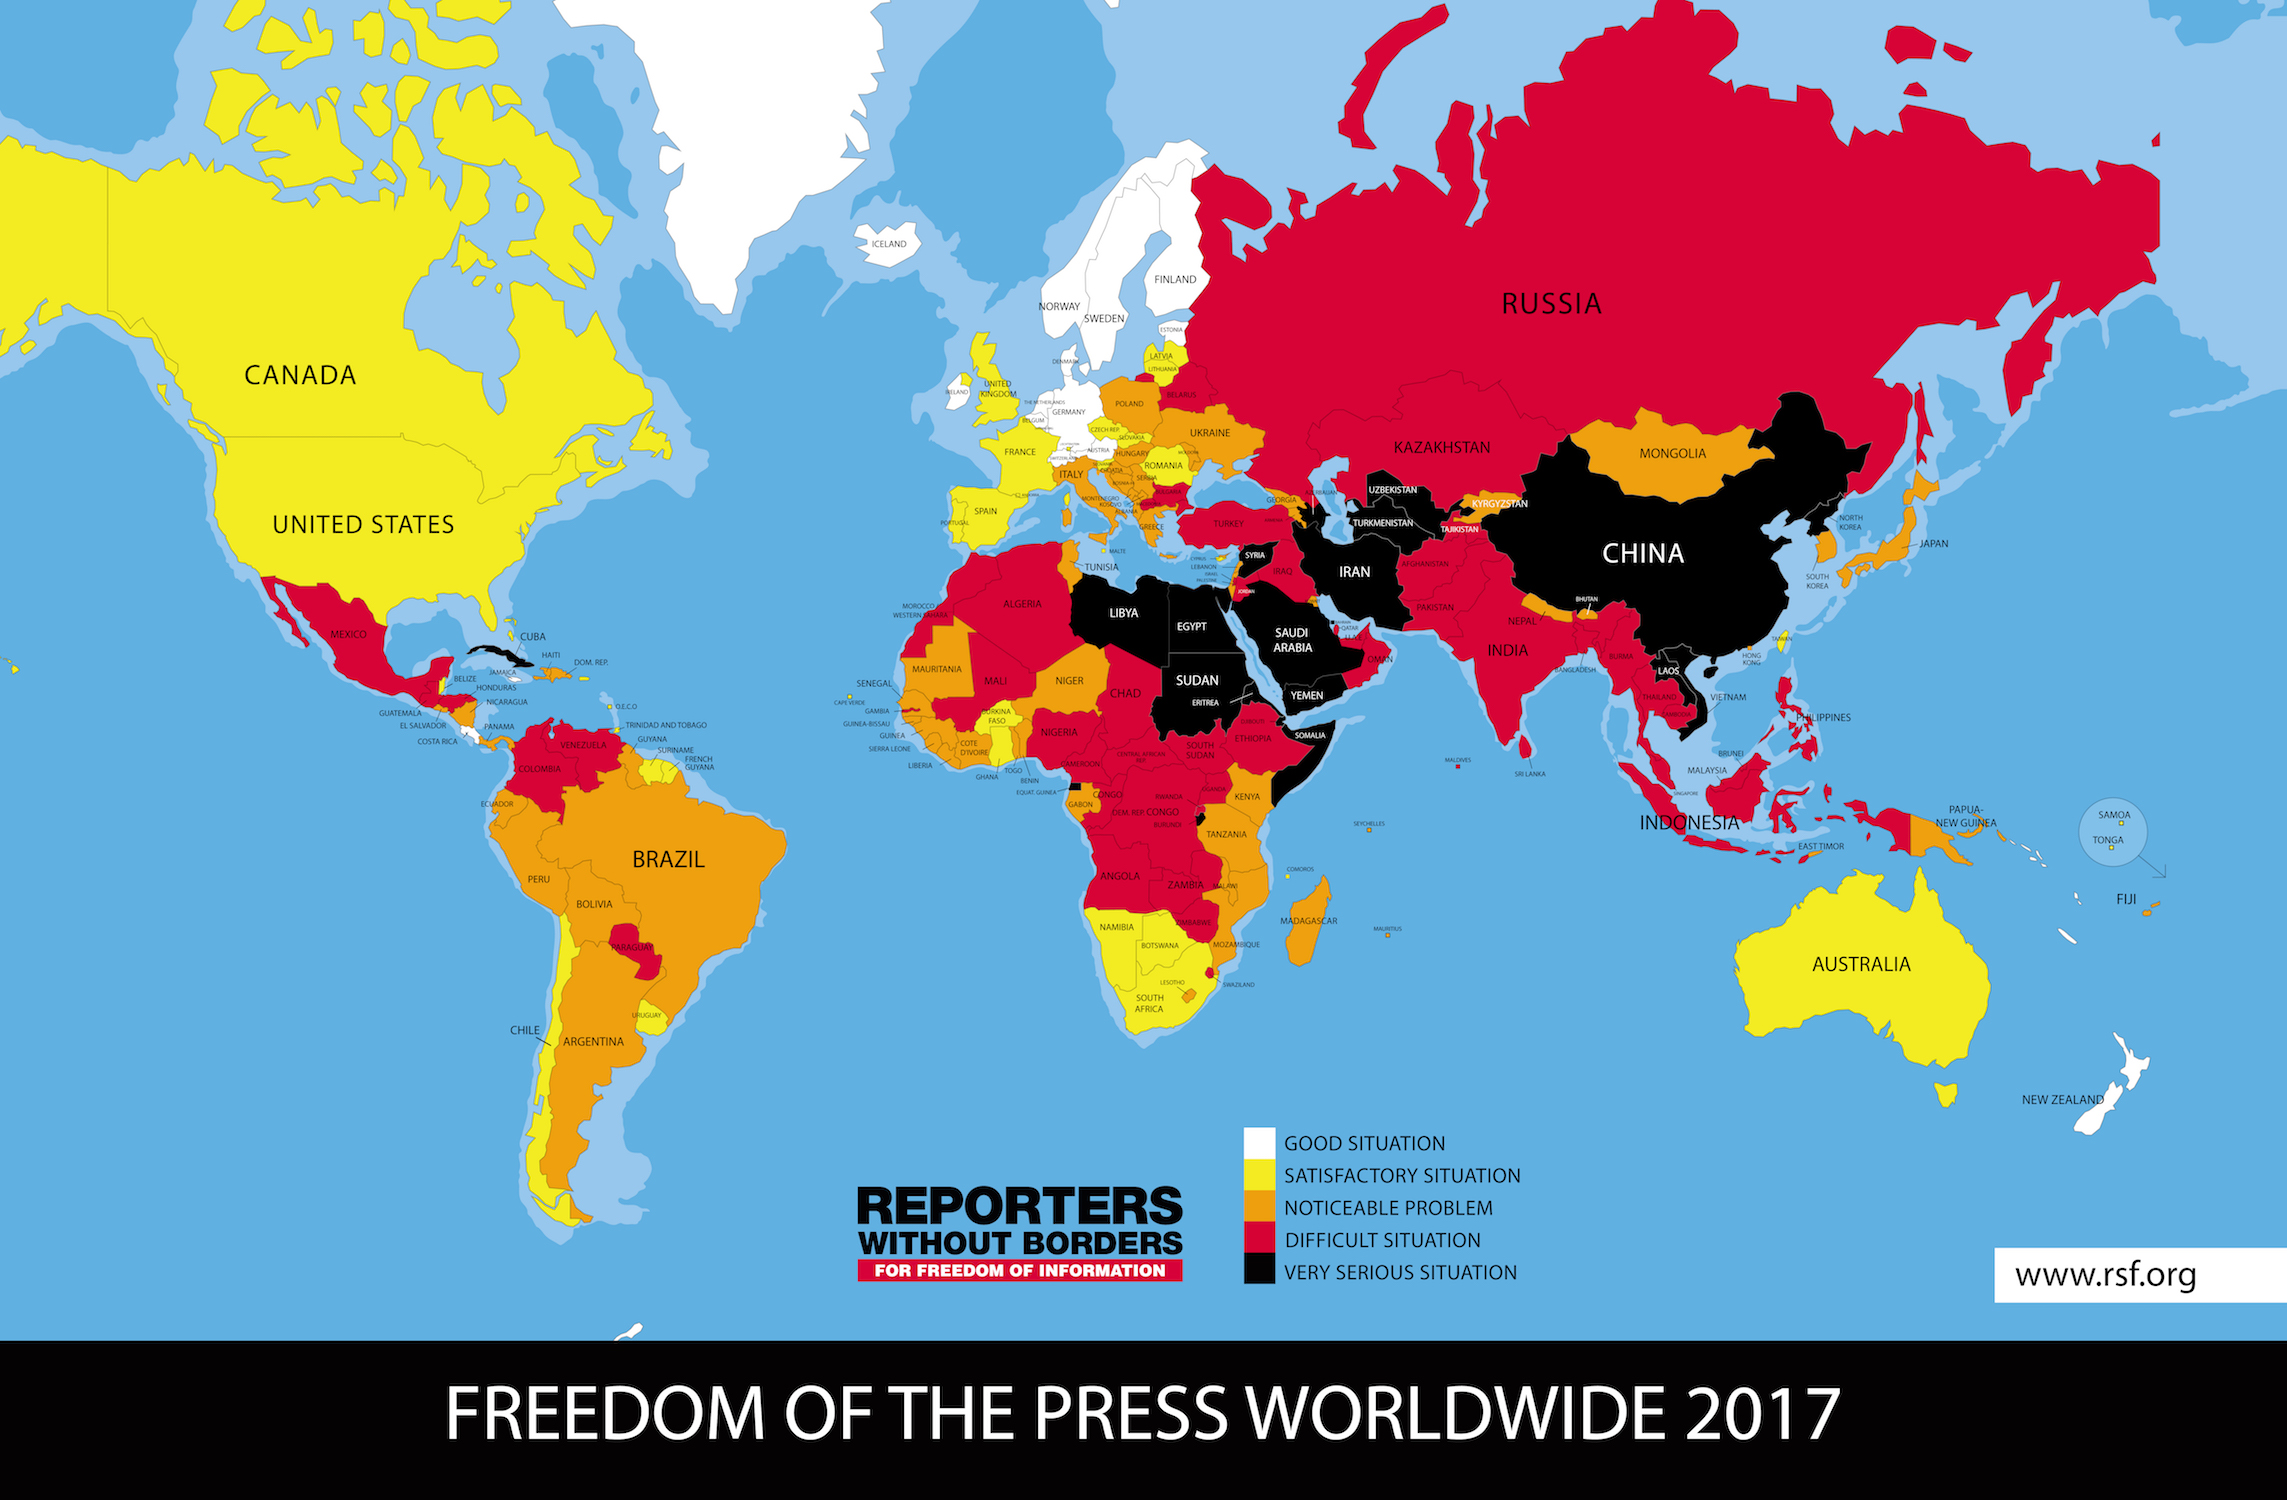 RSF 2017 press freedom index rankings